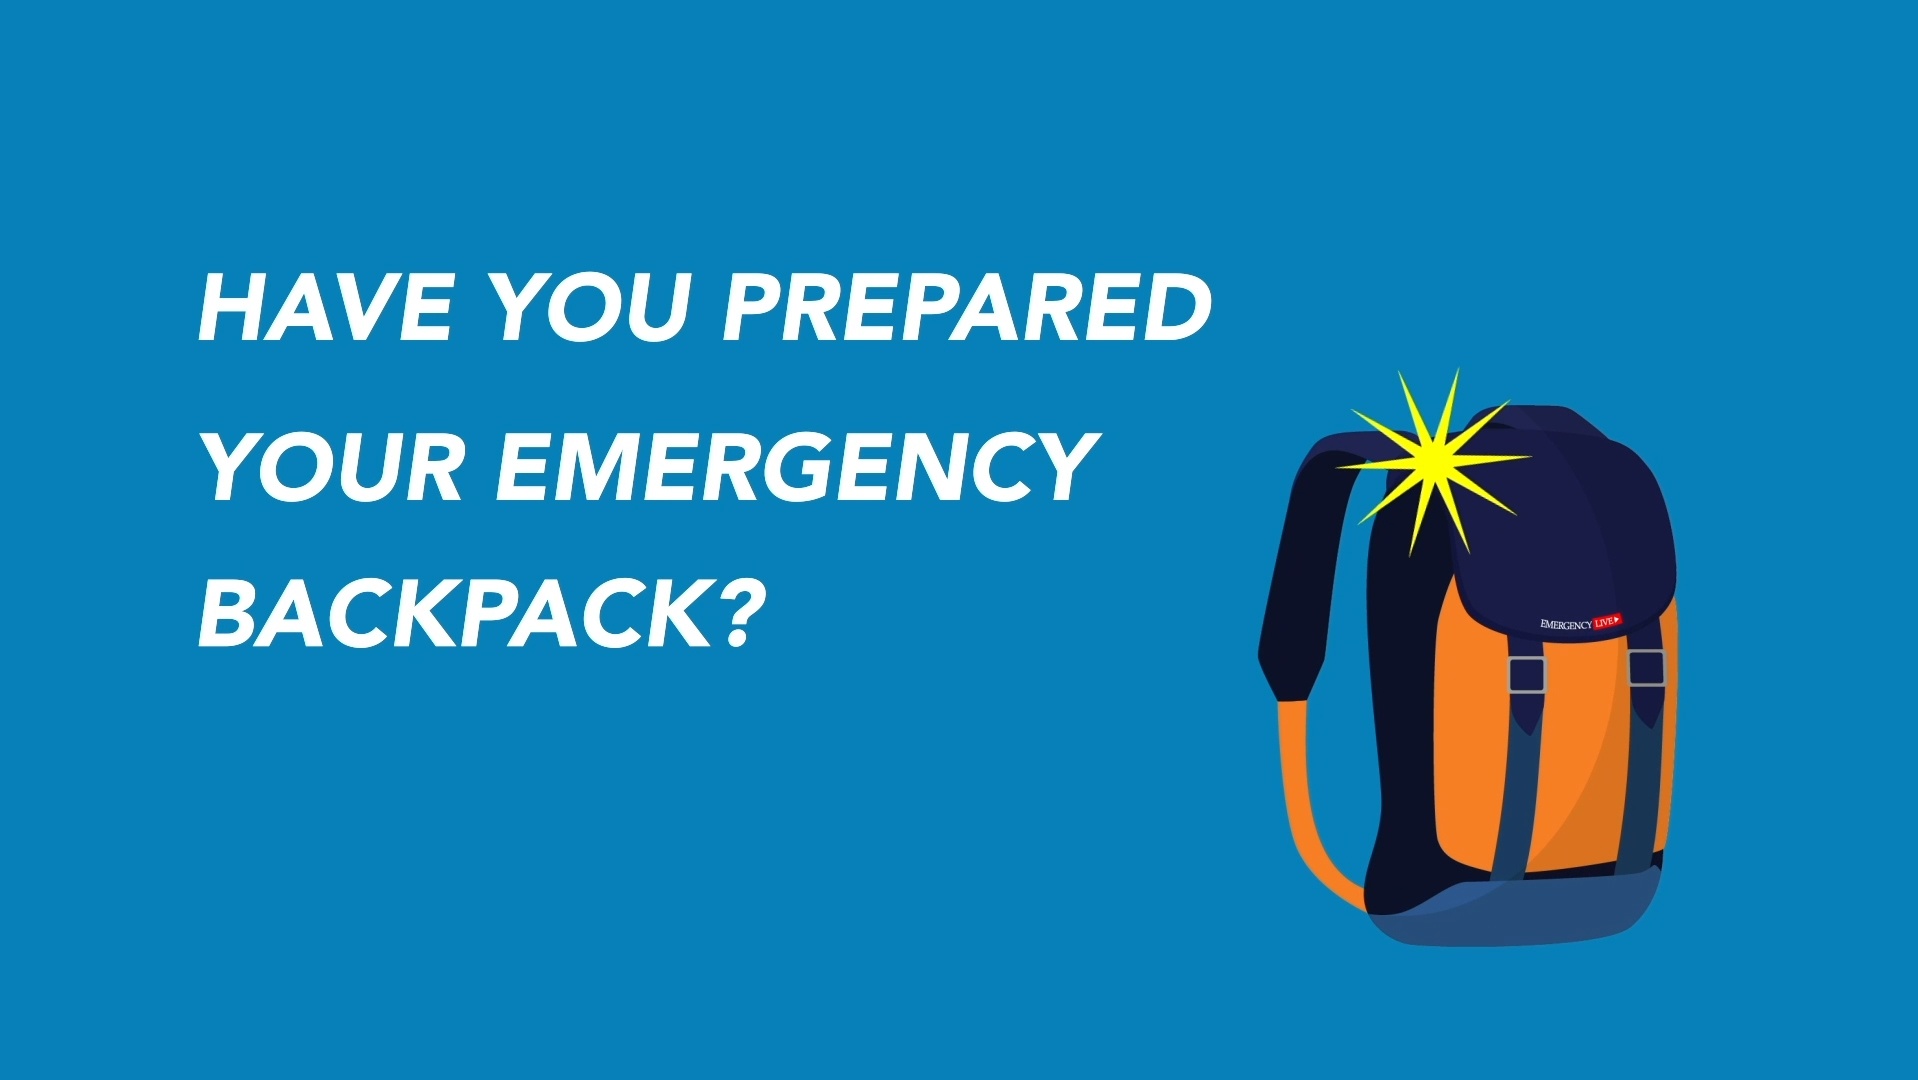 Emergency Live | Earthquake bag, the essential emergency kit in case of disasters: VIDEO